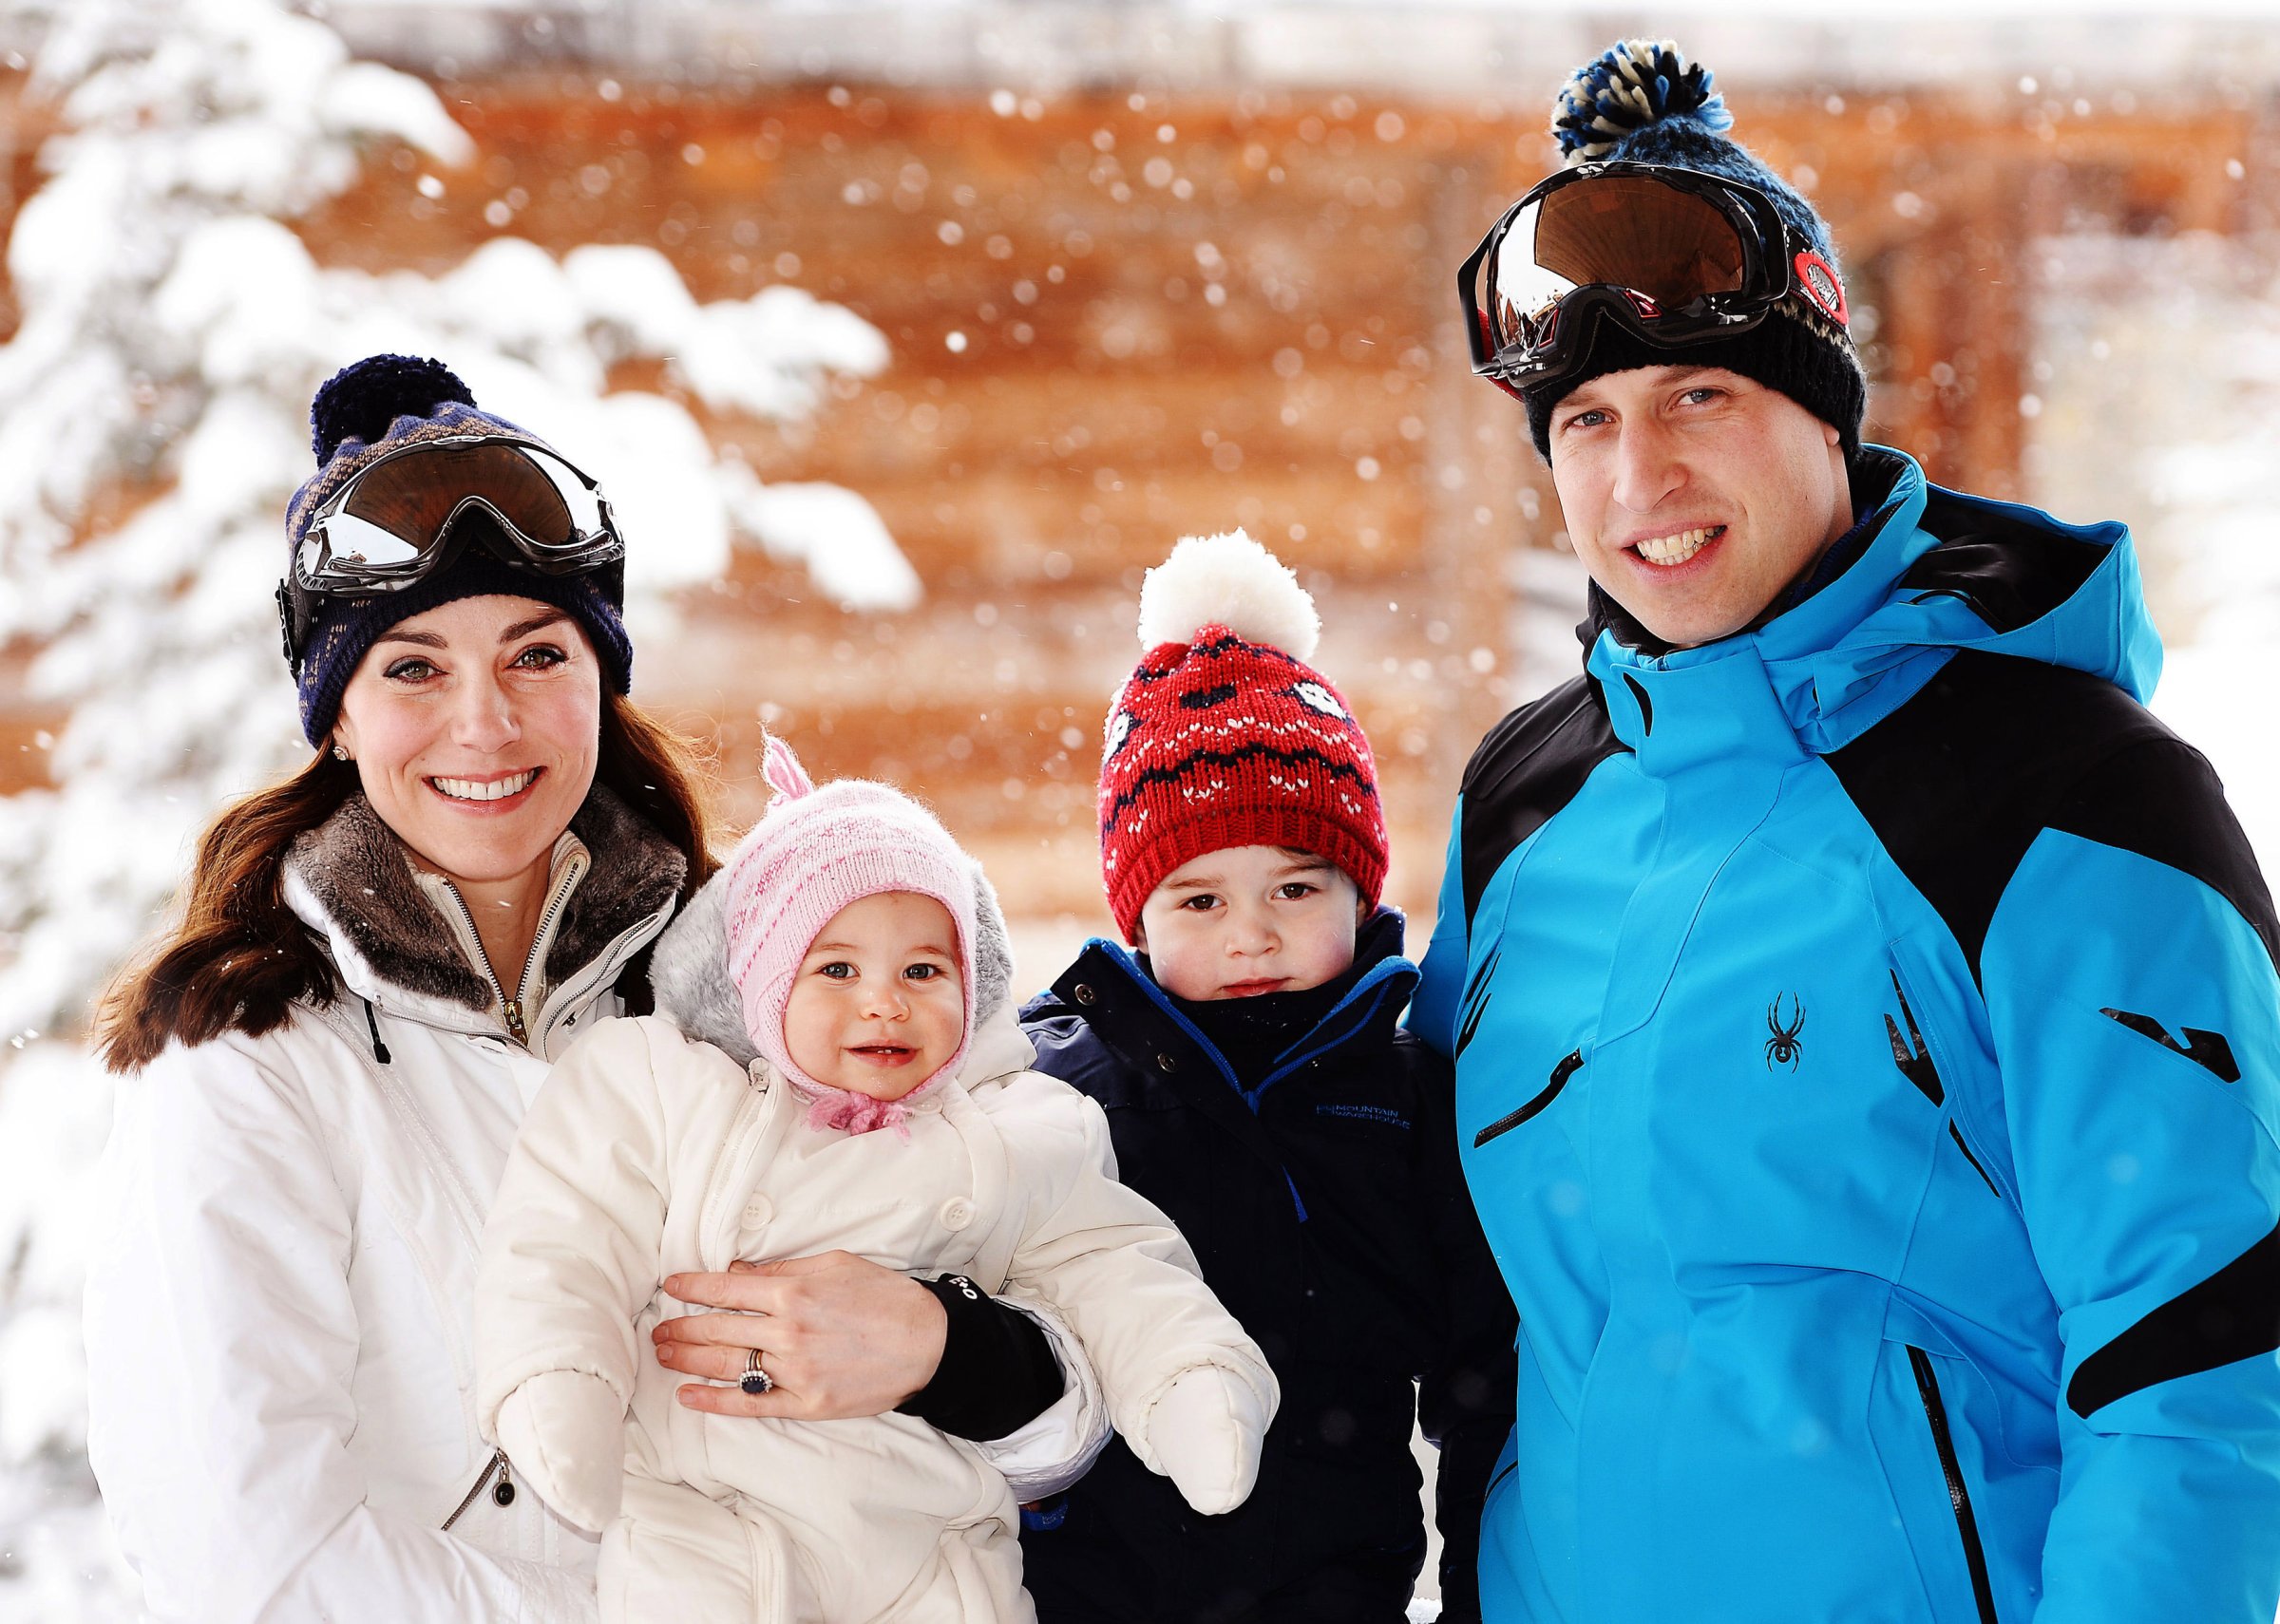 Catherine, Duchess of Cambridge and Prince William, Duke of Cambridge, with their children, Princess Charlotte and Prince George, enjoy a short private skiing break on March 3, 2016 in the French Alps, France.